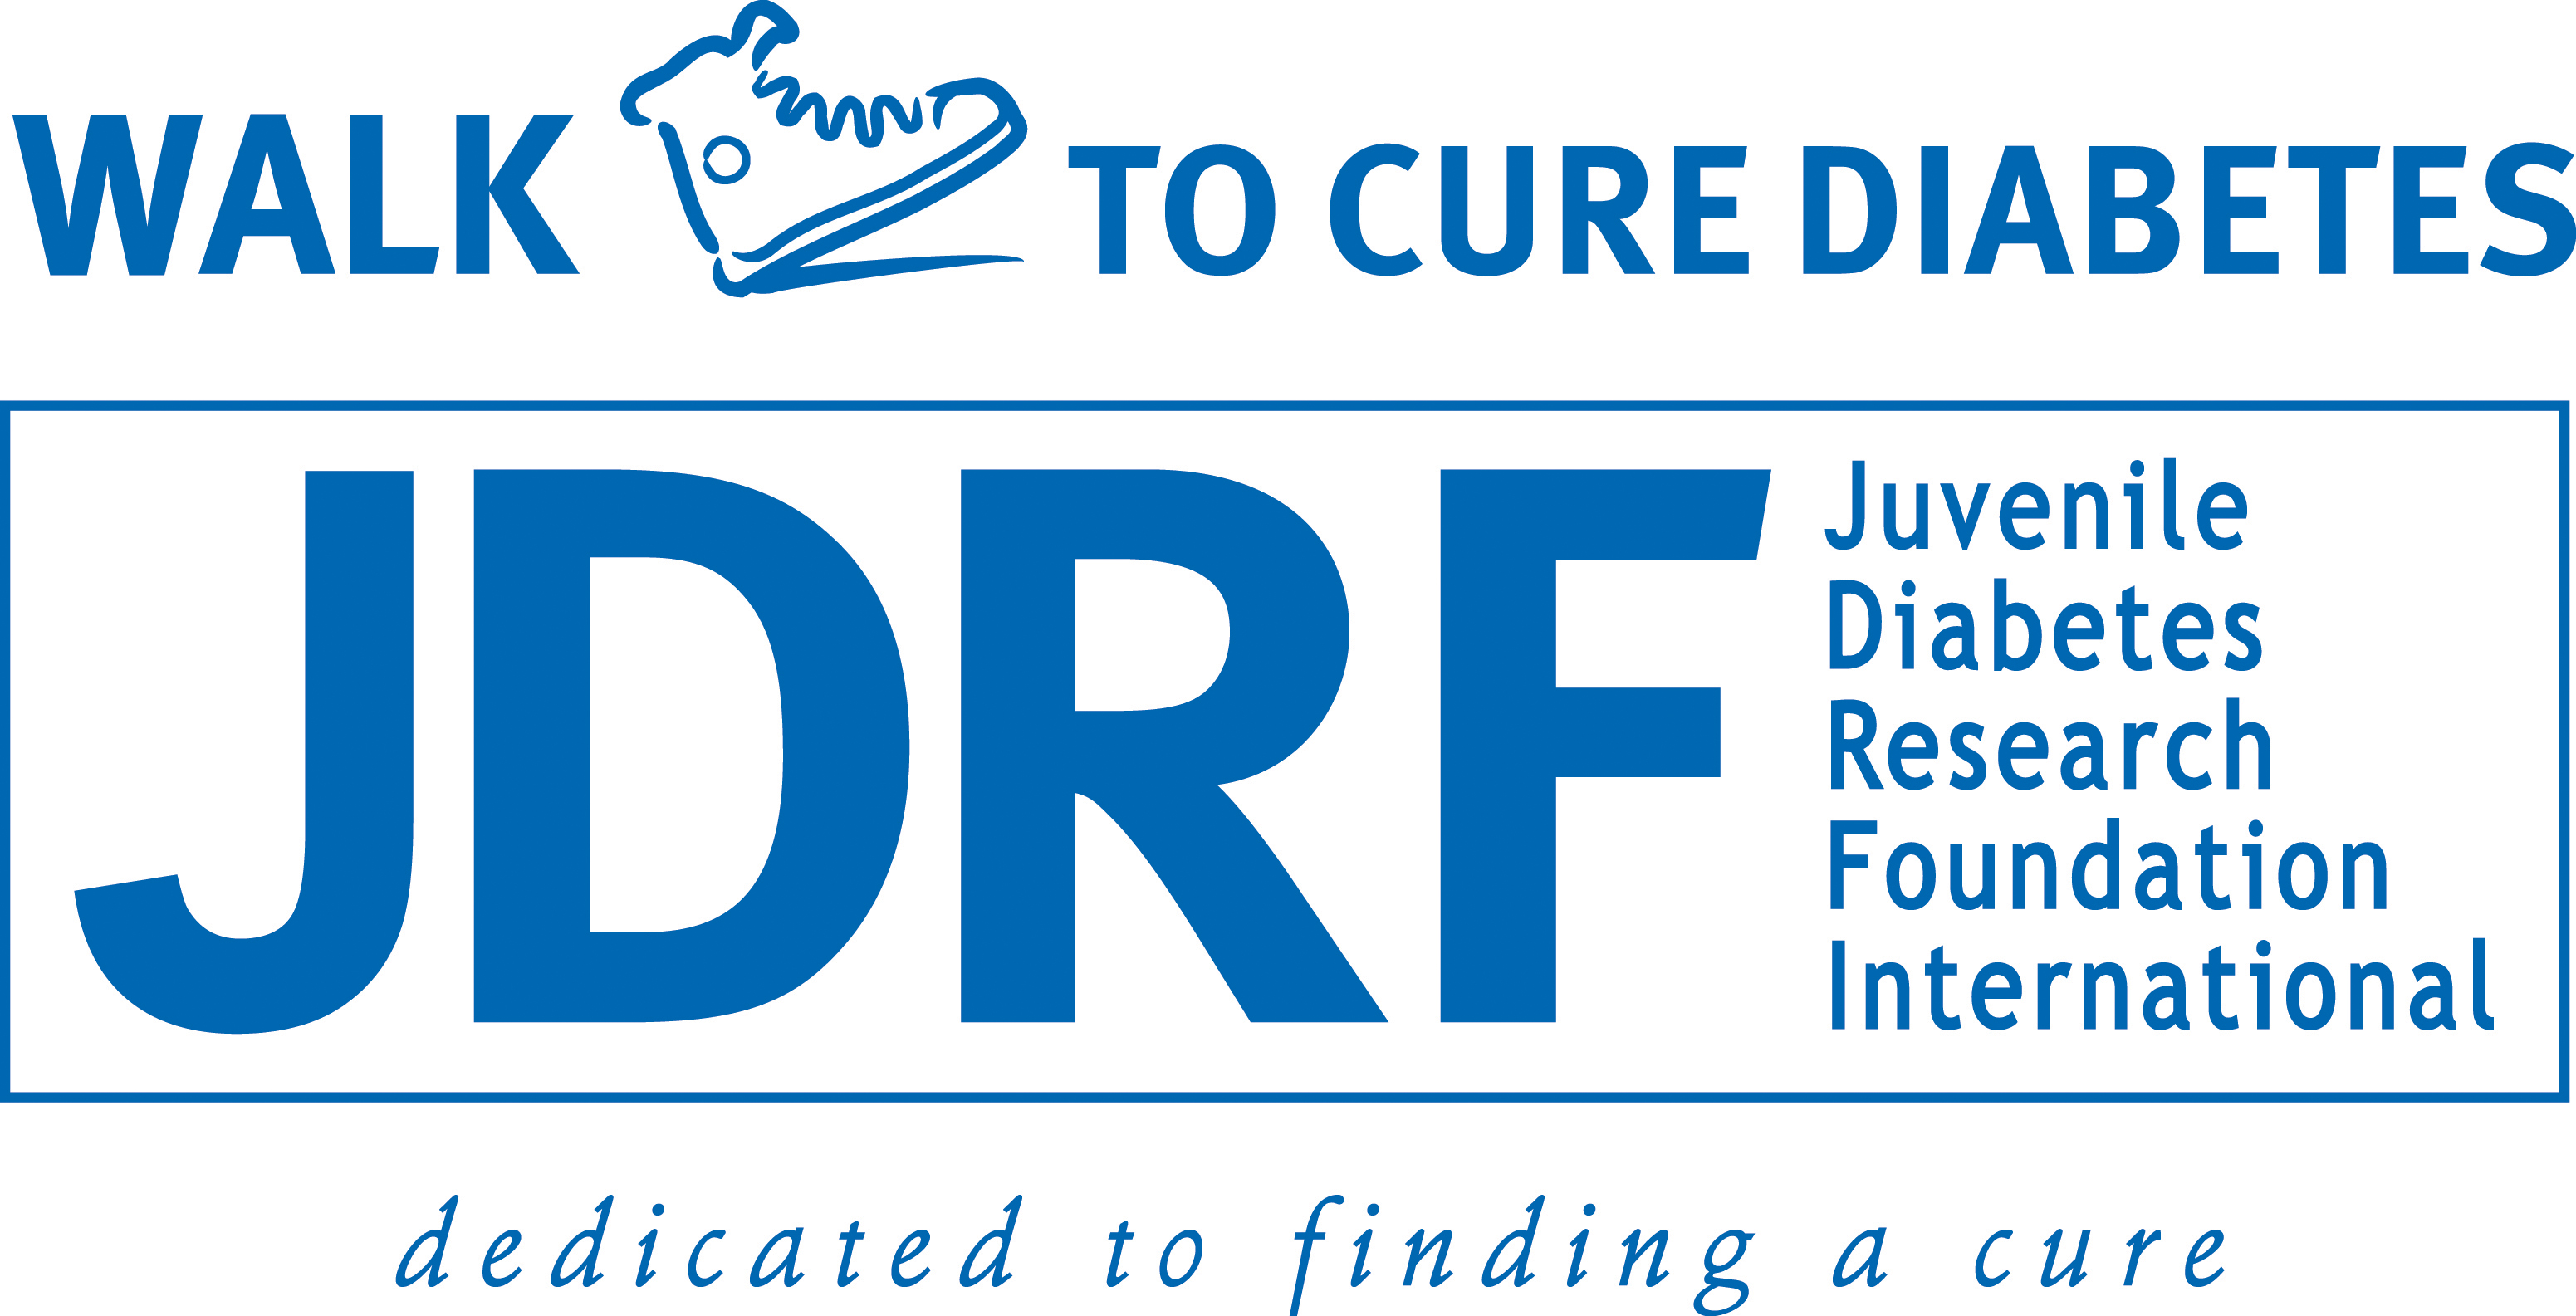 South Dakota Walk to Cure Diabetes Expected to Bring Out 3,000